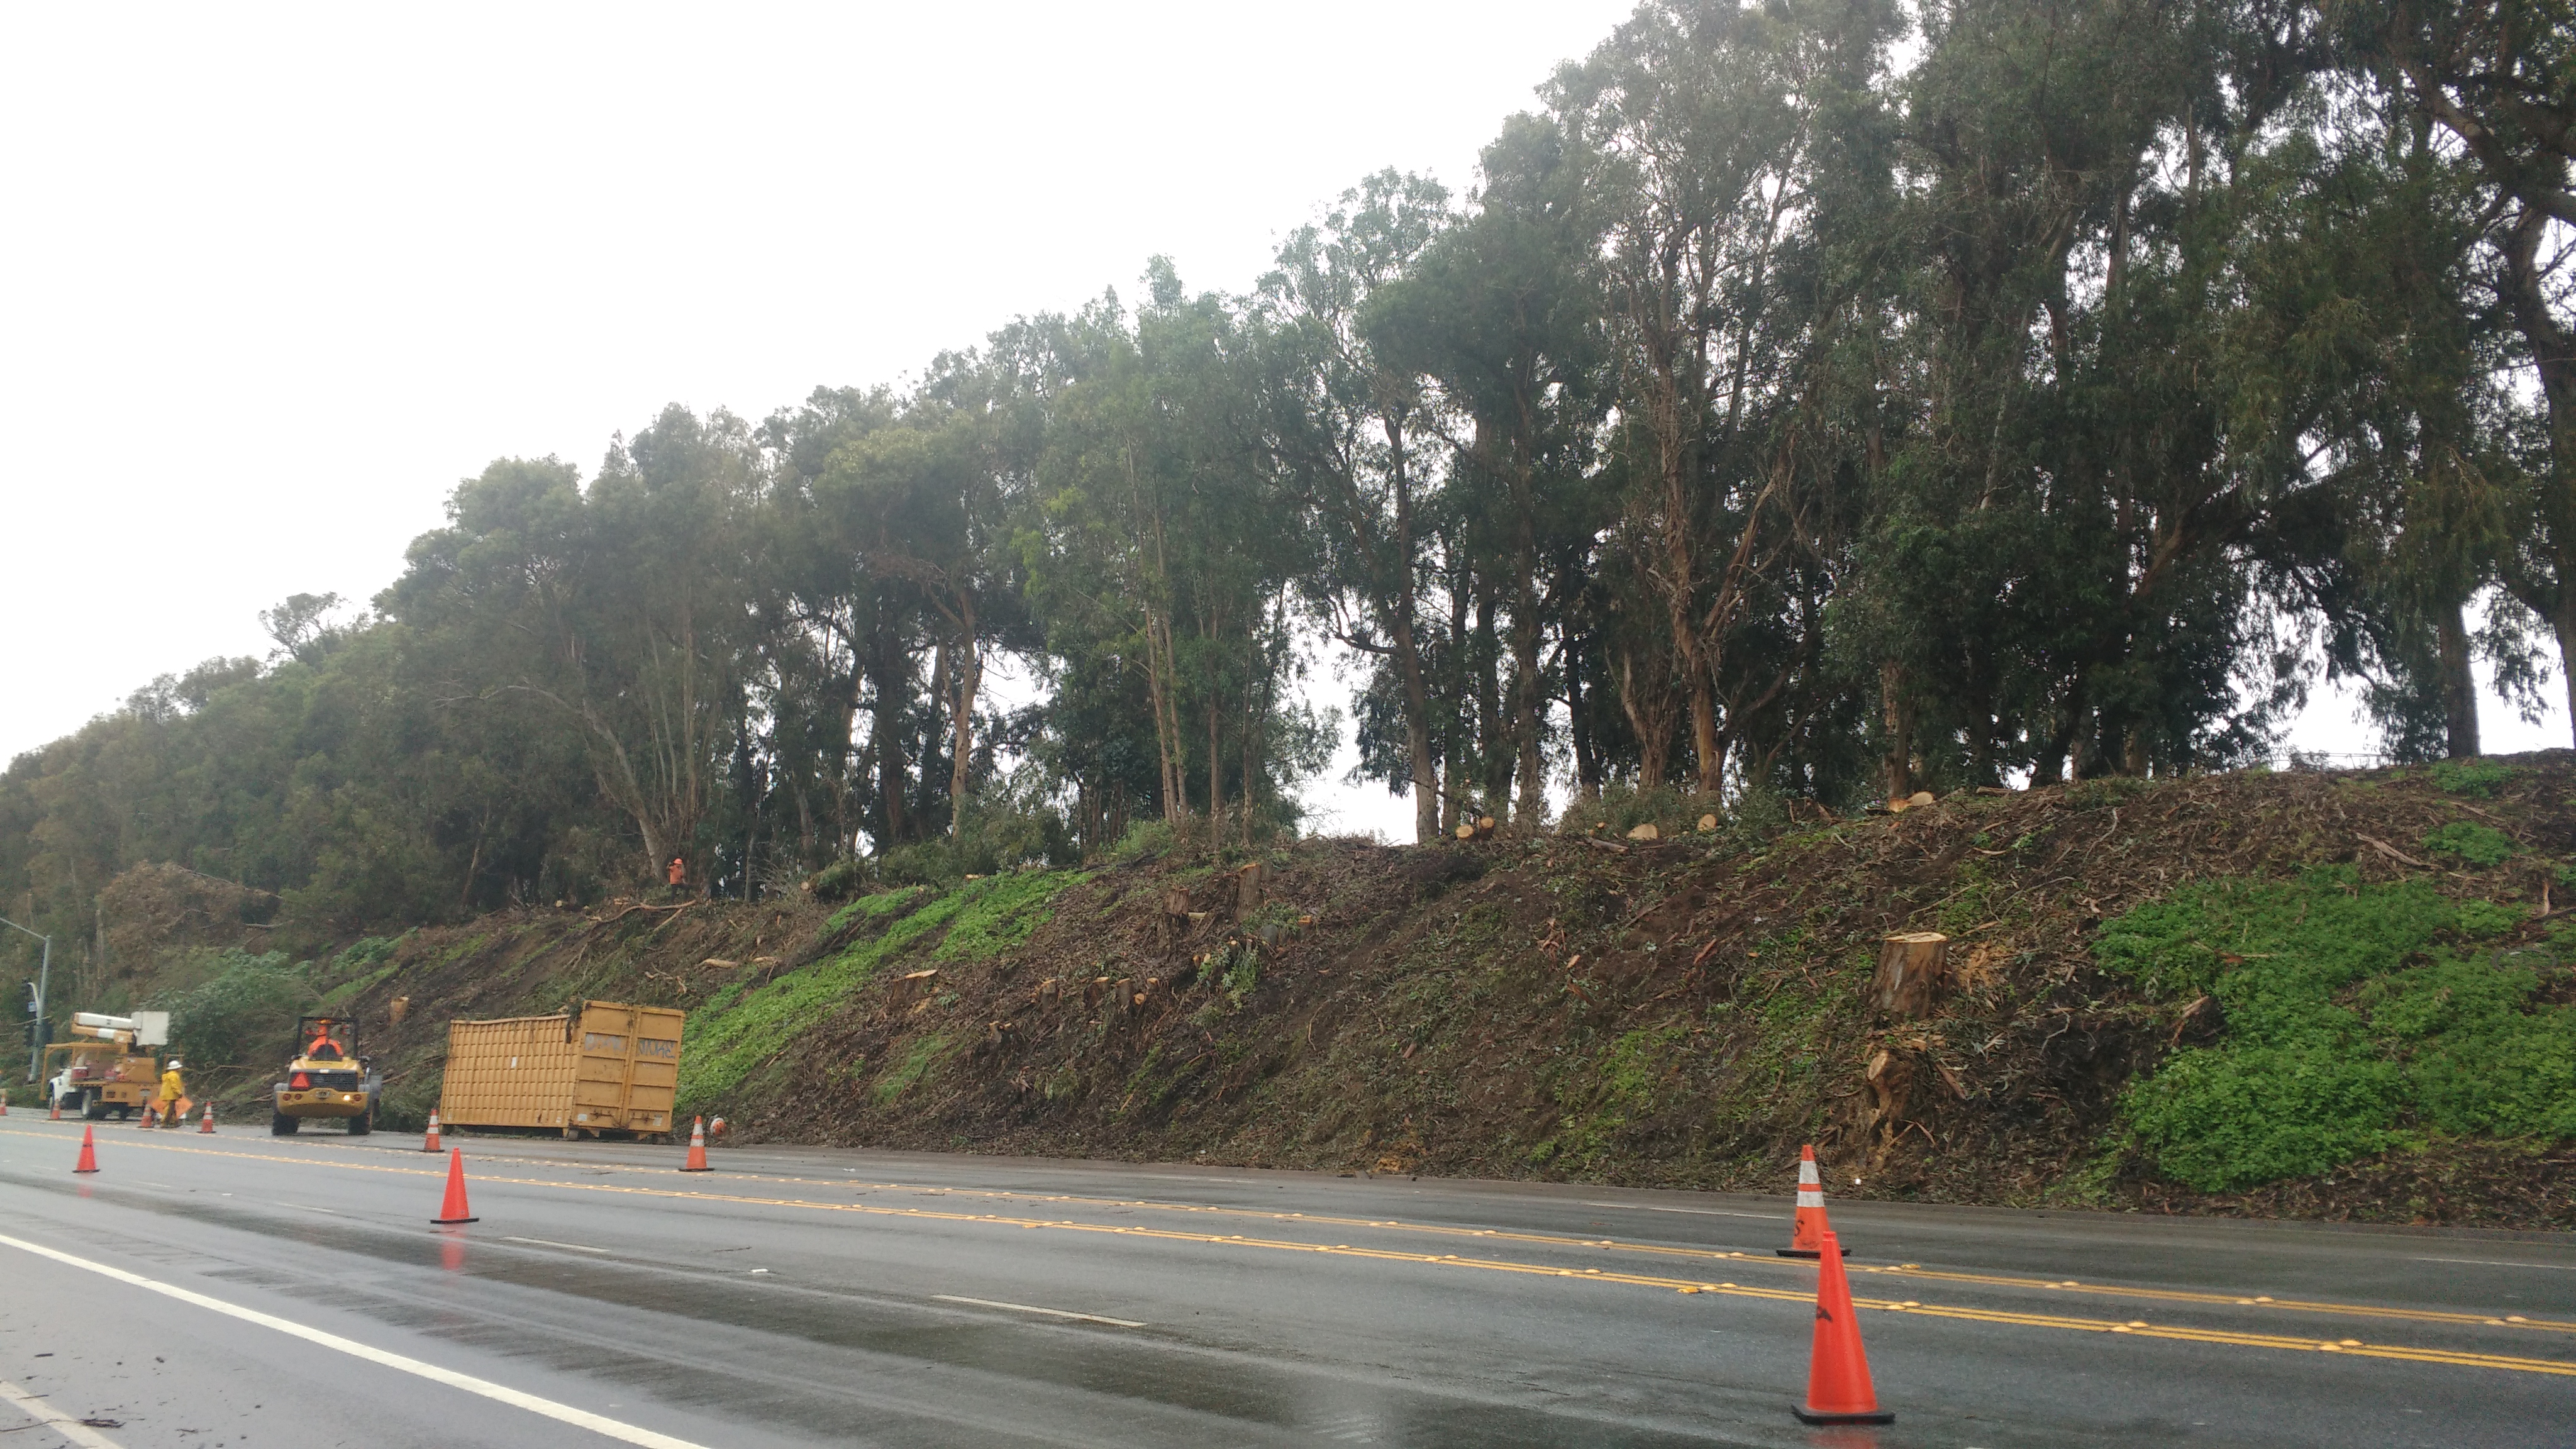 This photo shows roadside crews removing trees on a slope.